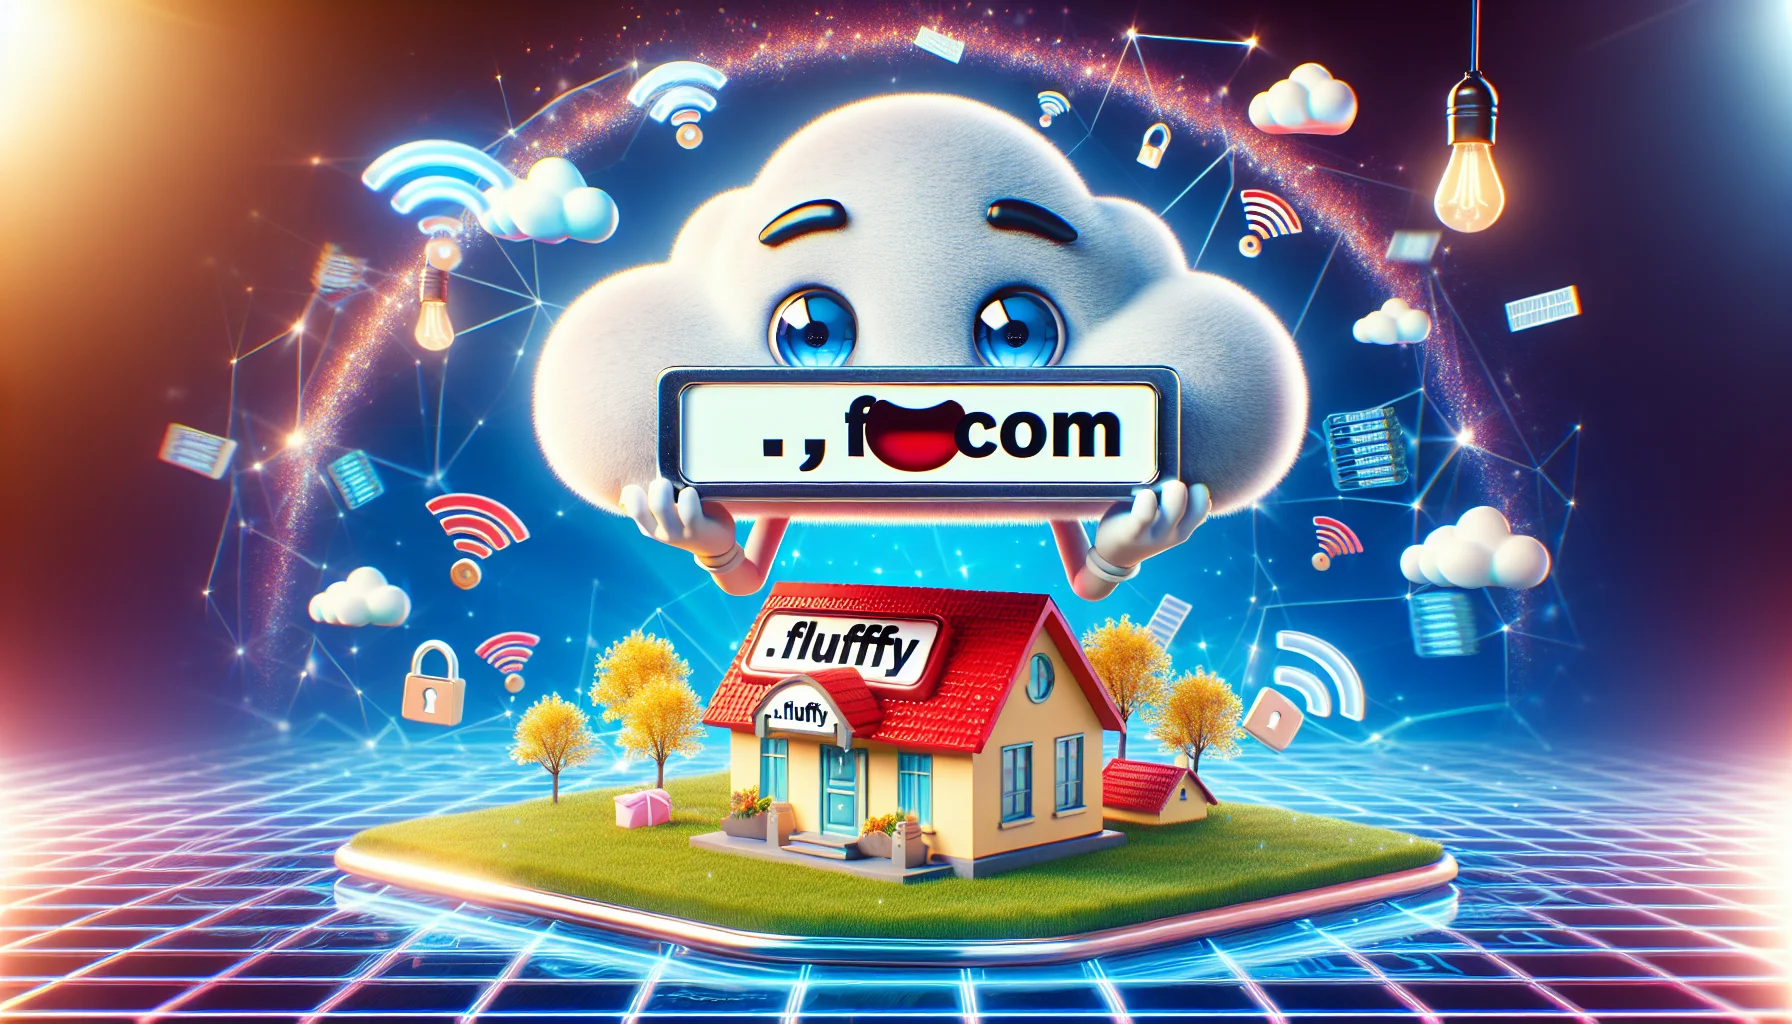 Generate a humorous scenario featuring an animated cloud character with a smiling, friendly face, holding an oversized, stylized domain label in its fluffy arms. However, instead of the usual '.com', the domain extension is '.fluffy'. The cloud is 'floating' over a vibrant, attractively designed web host represented by a spacious, inviting digital 'home'. The cloud pitches the '.fluffy' domain to the digital home with excited gestures and animated facial expressions. The surrounding environment sparkles with internet-related imagery like Wi-Fi signals, network nodes, and data packets. The scene communicates the ease and fun of web hosting and domain registration.